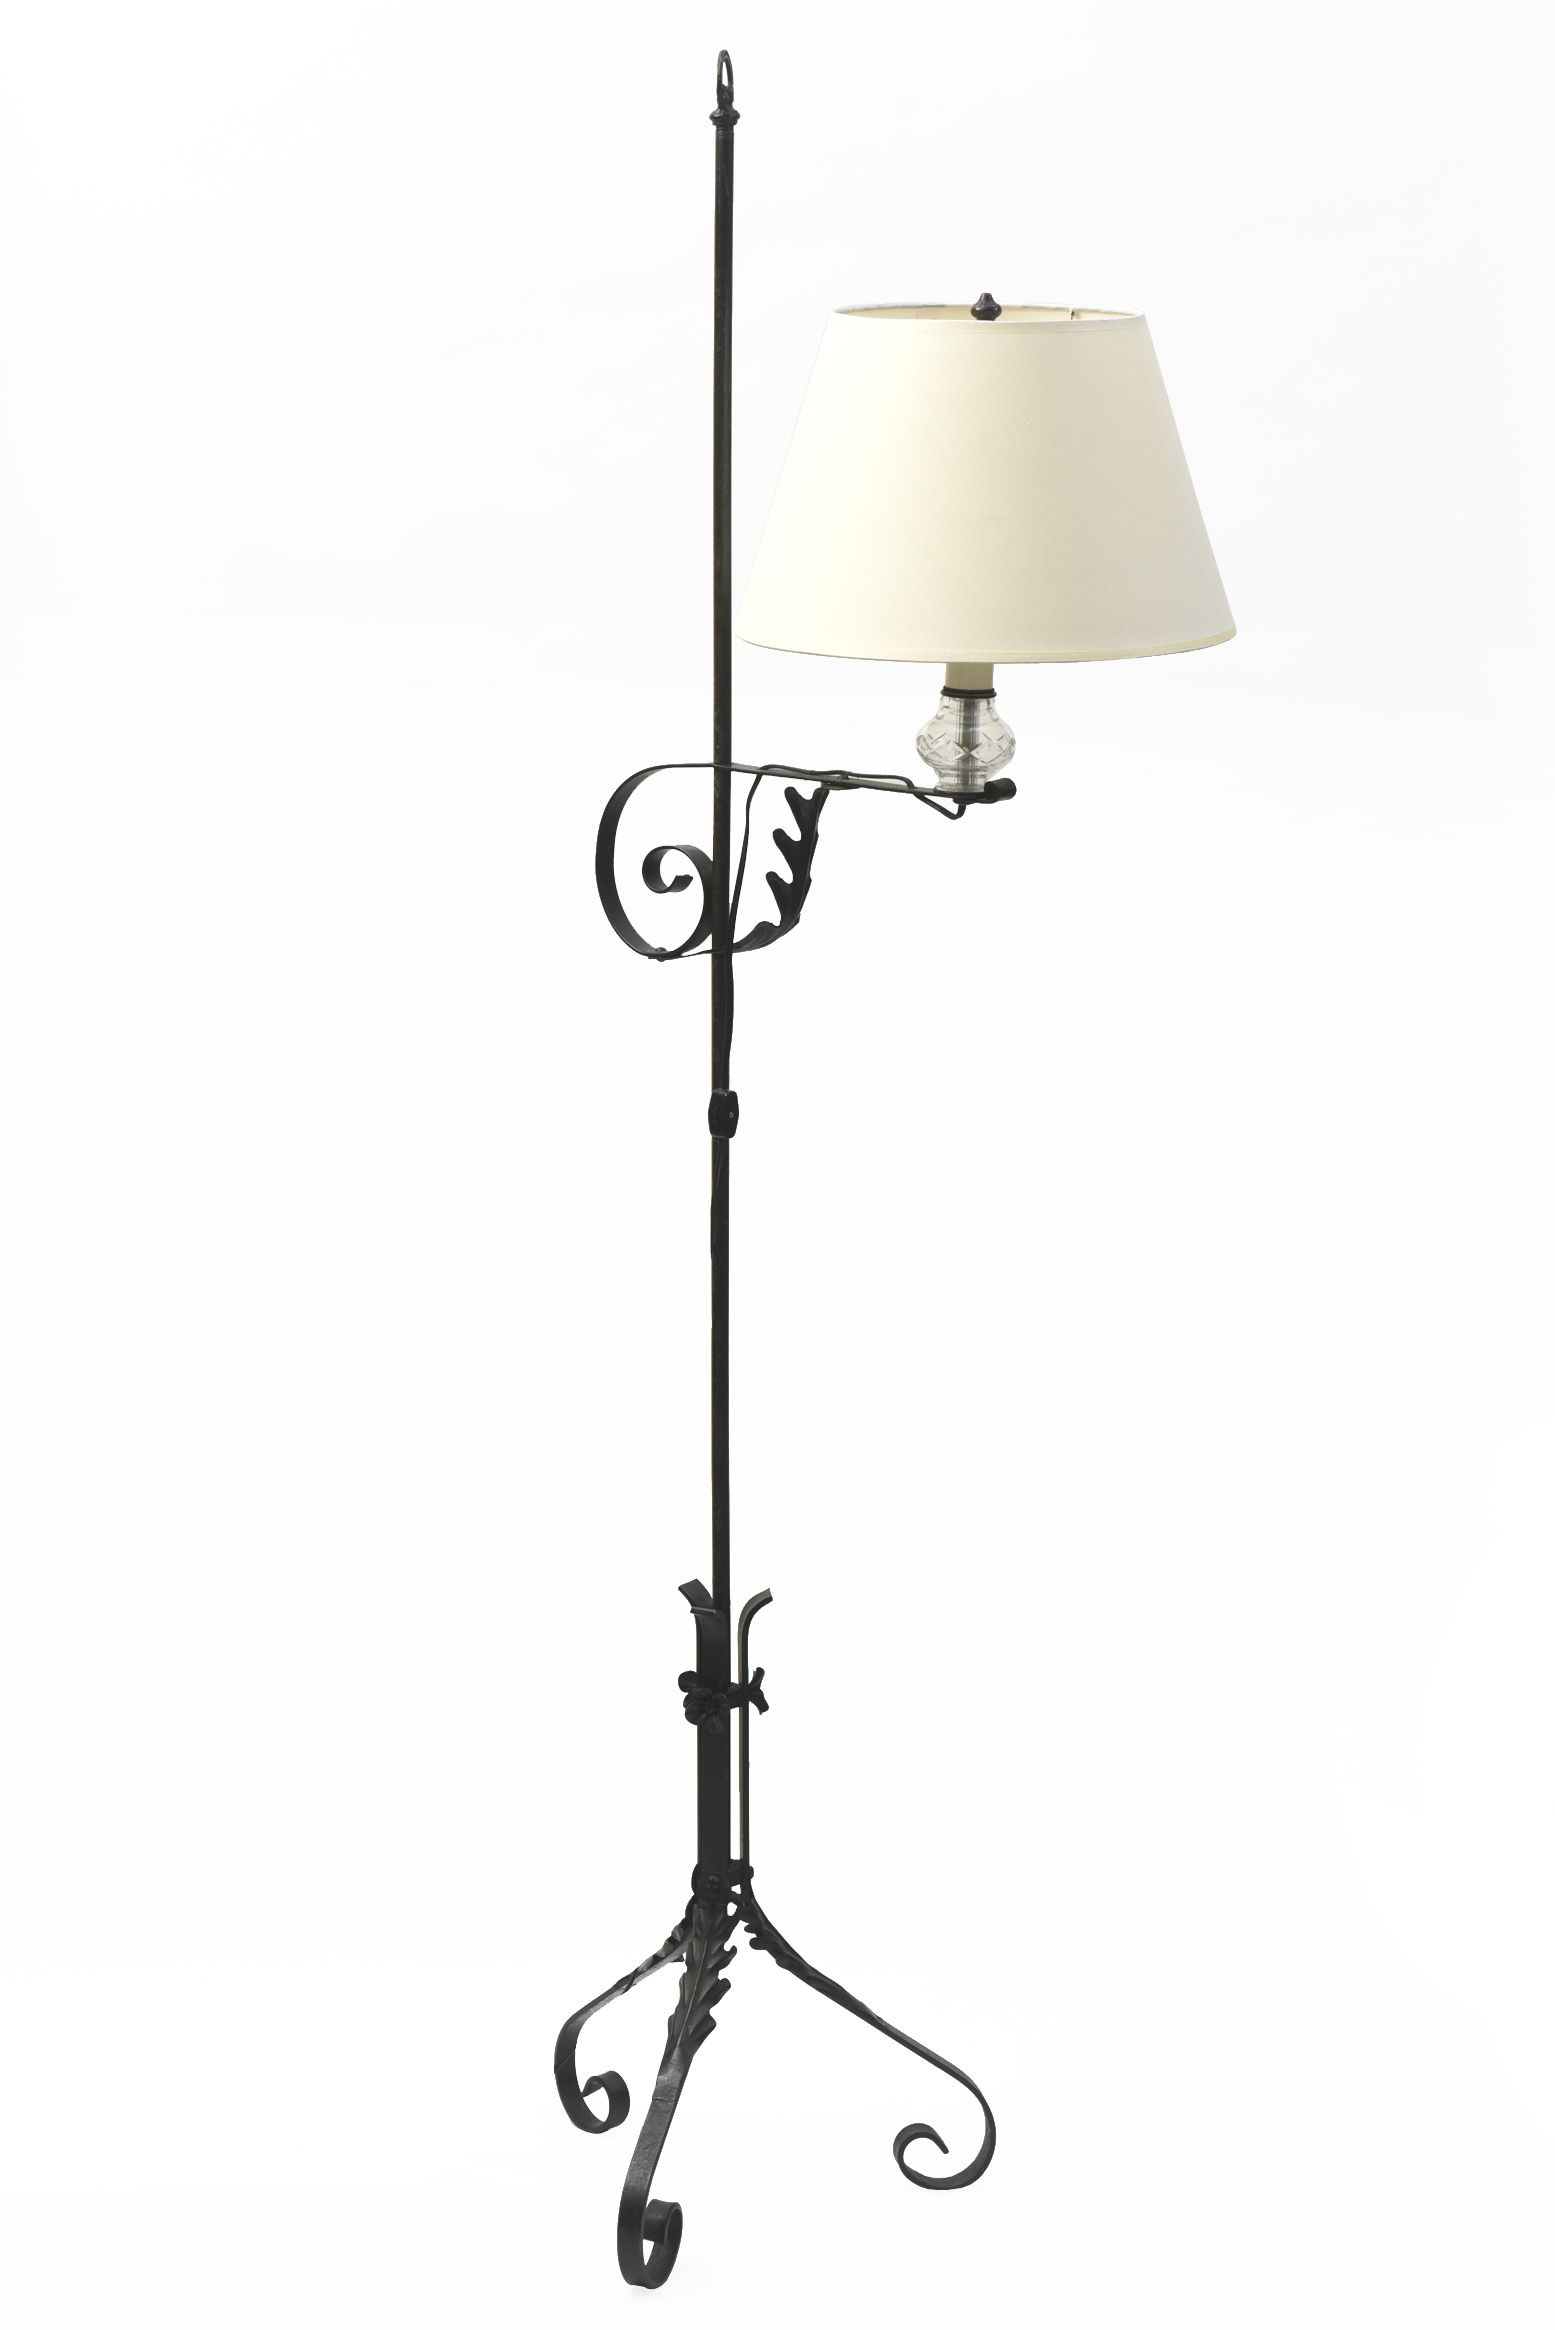 Wrought Iron Colonial Style Bridge Lamp Antique Lighting inside proportions 1555 X 2330